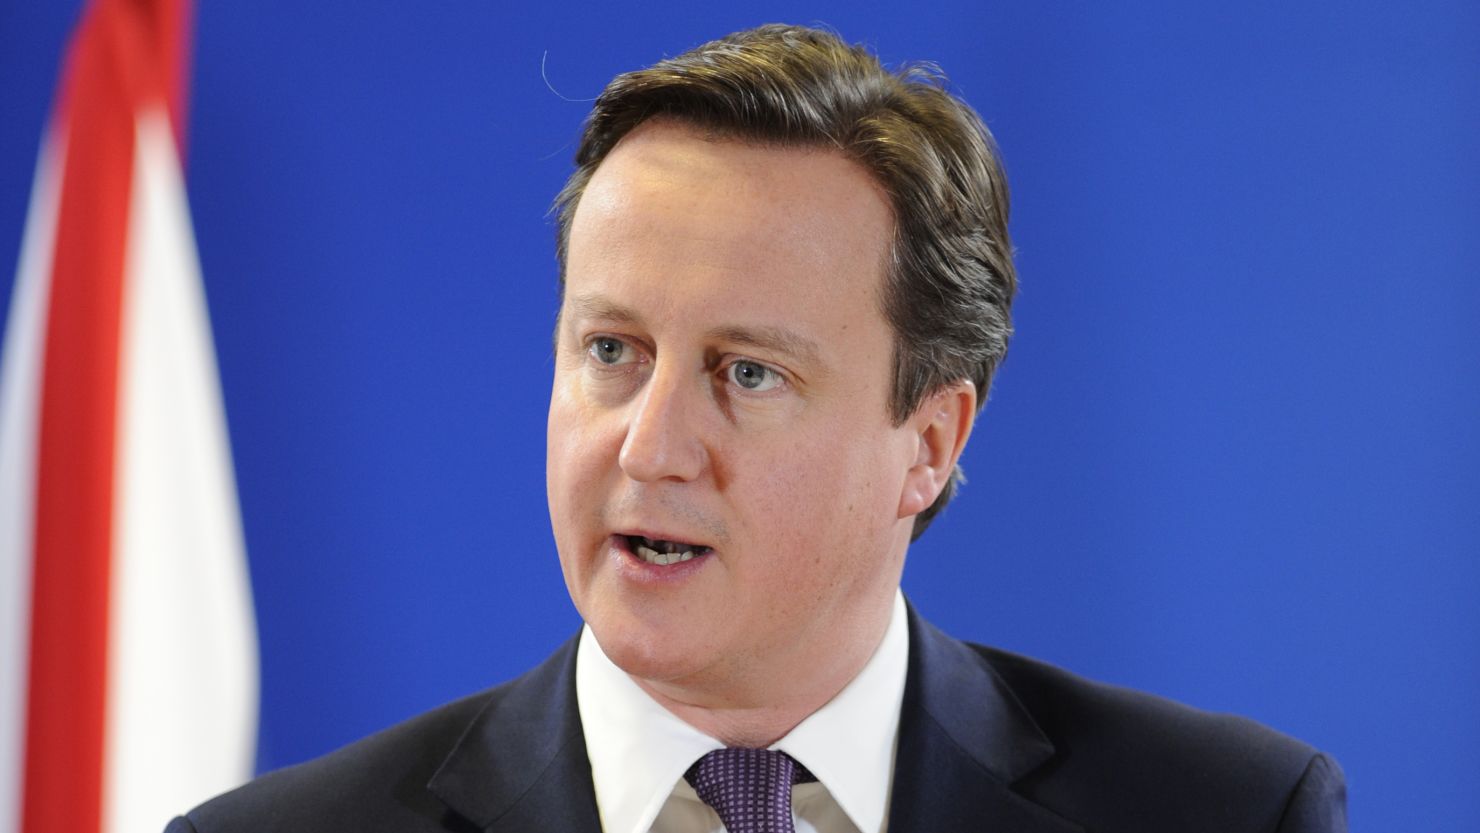 British Prime Minister David Cameron has been given the right to see witness statements in advance.